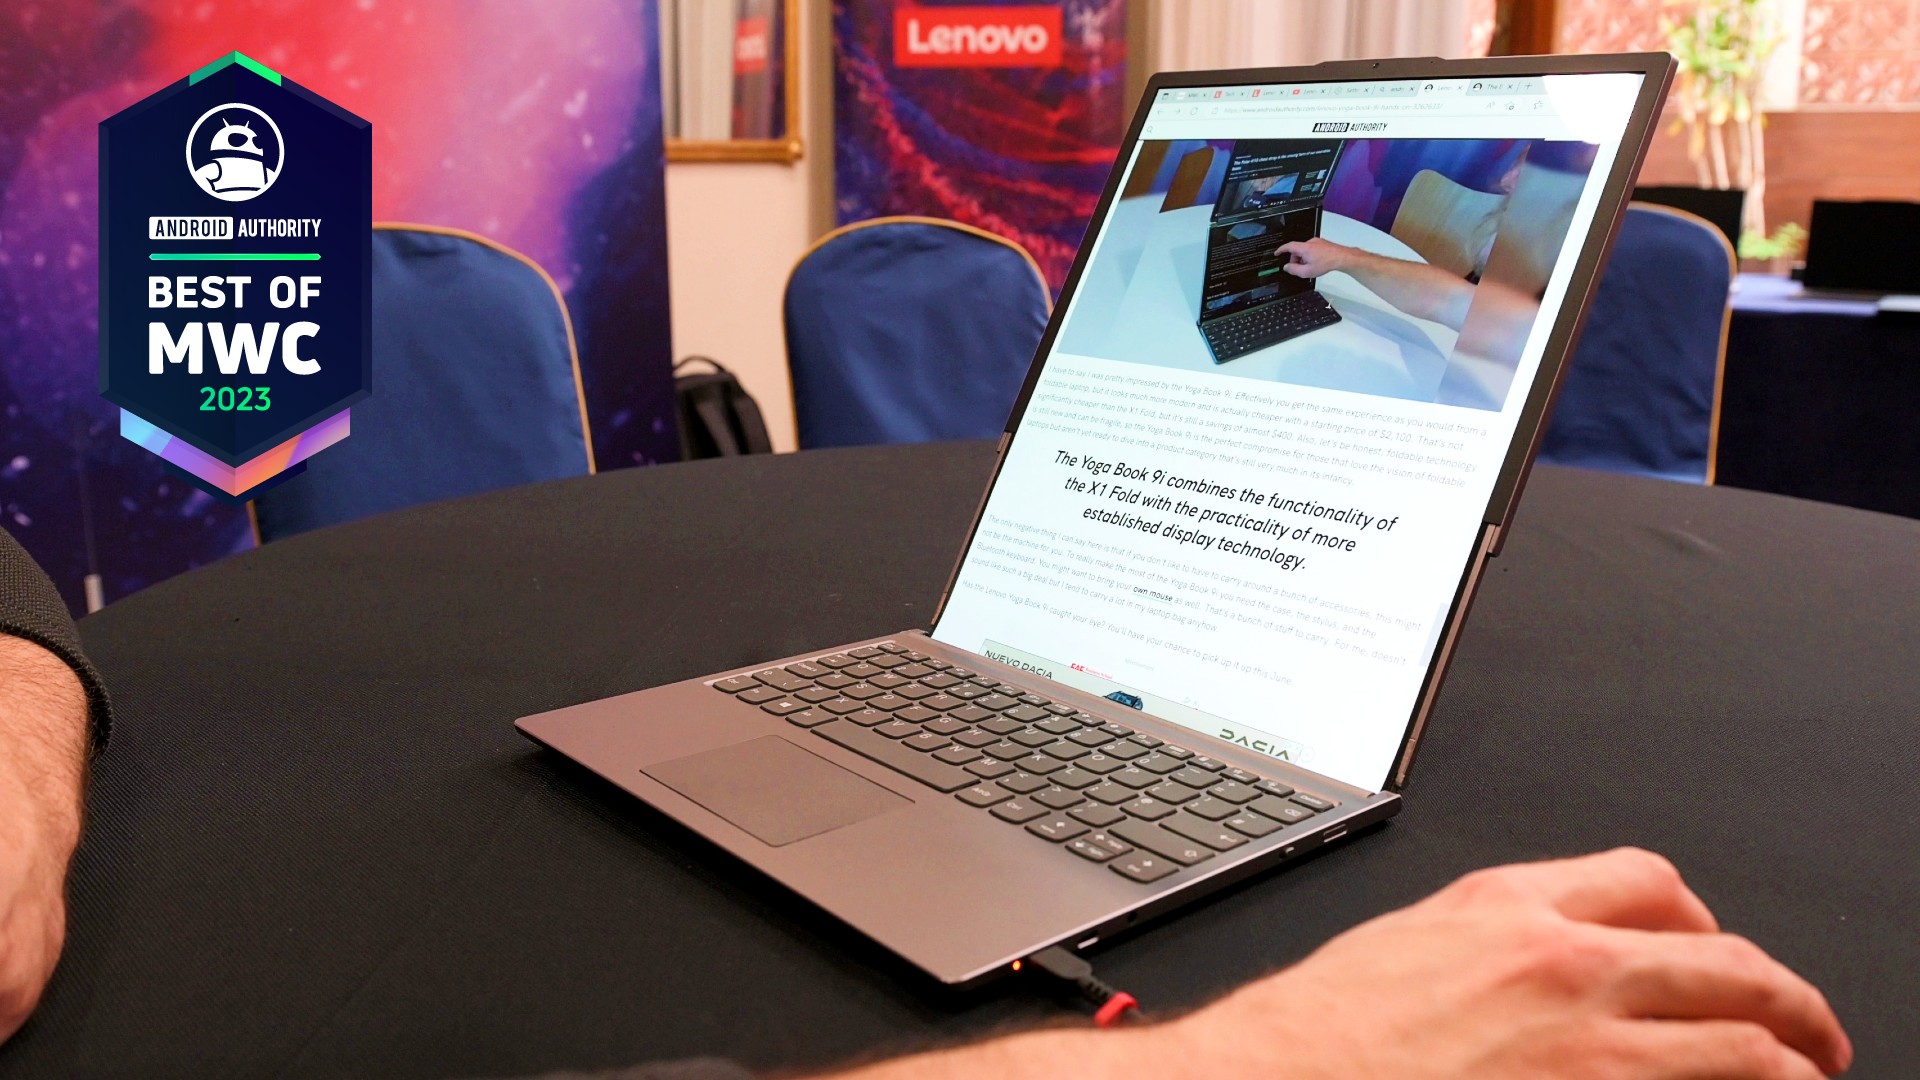 lenovo rollable screen laptop best of mwc